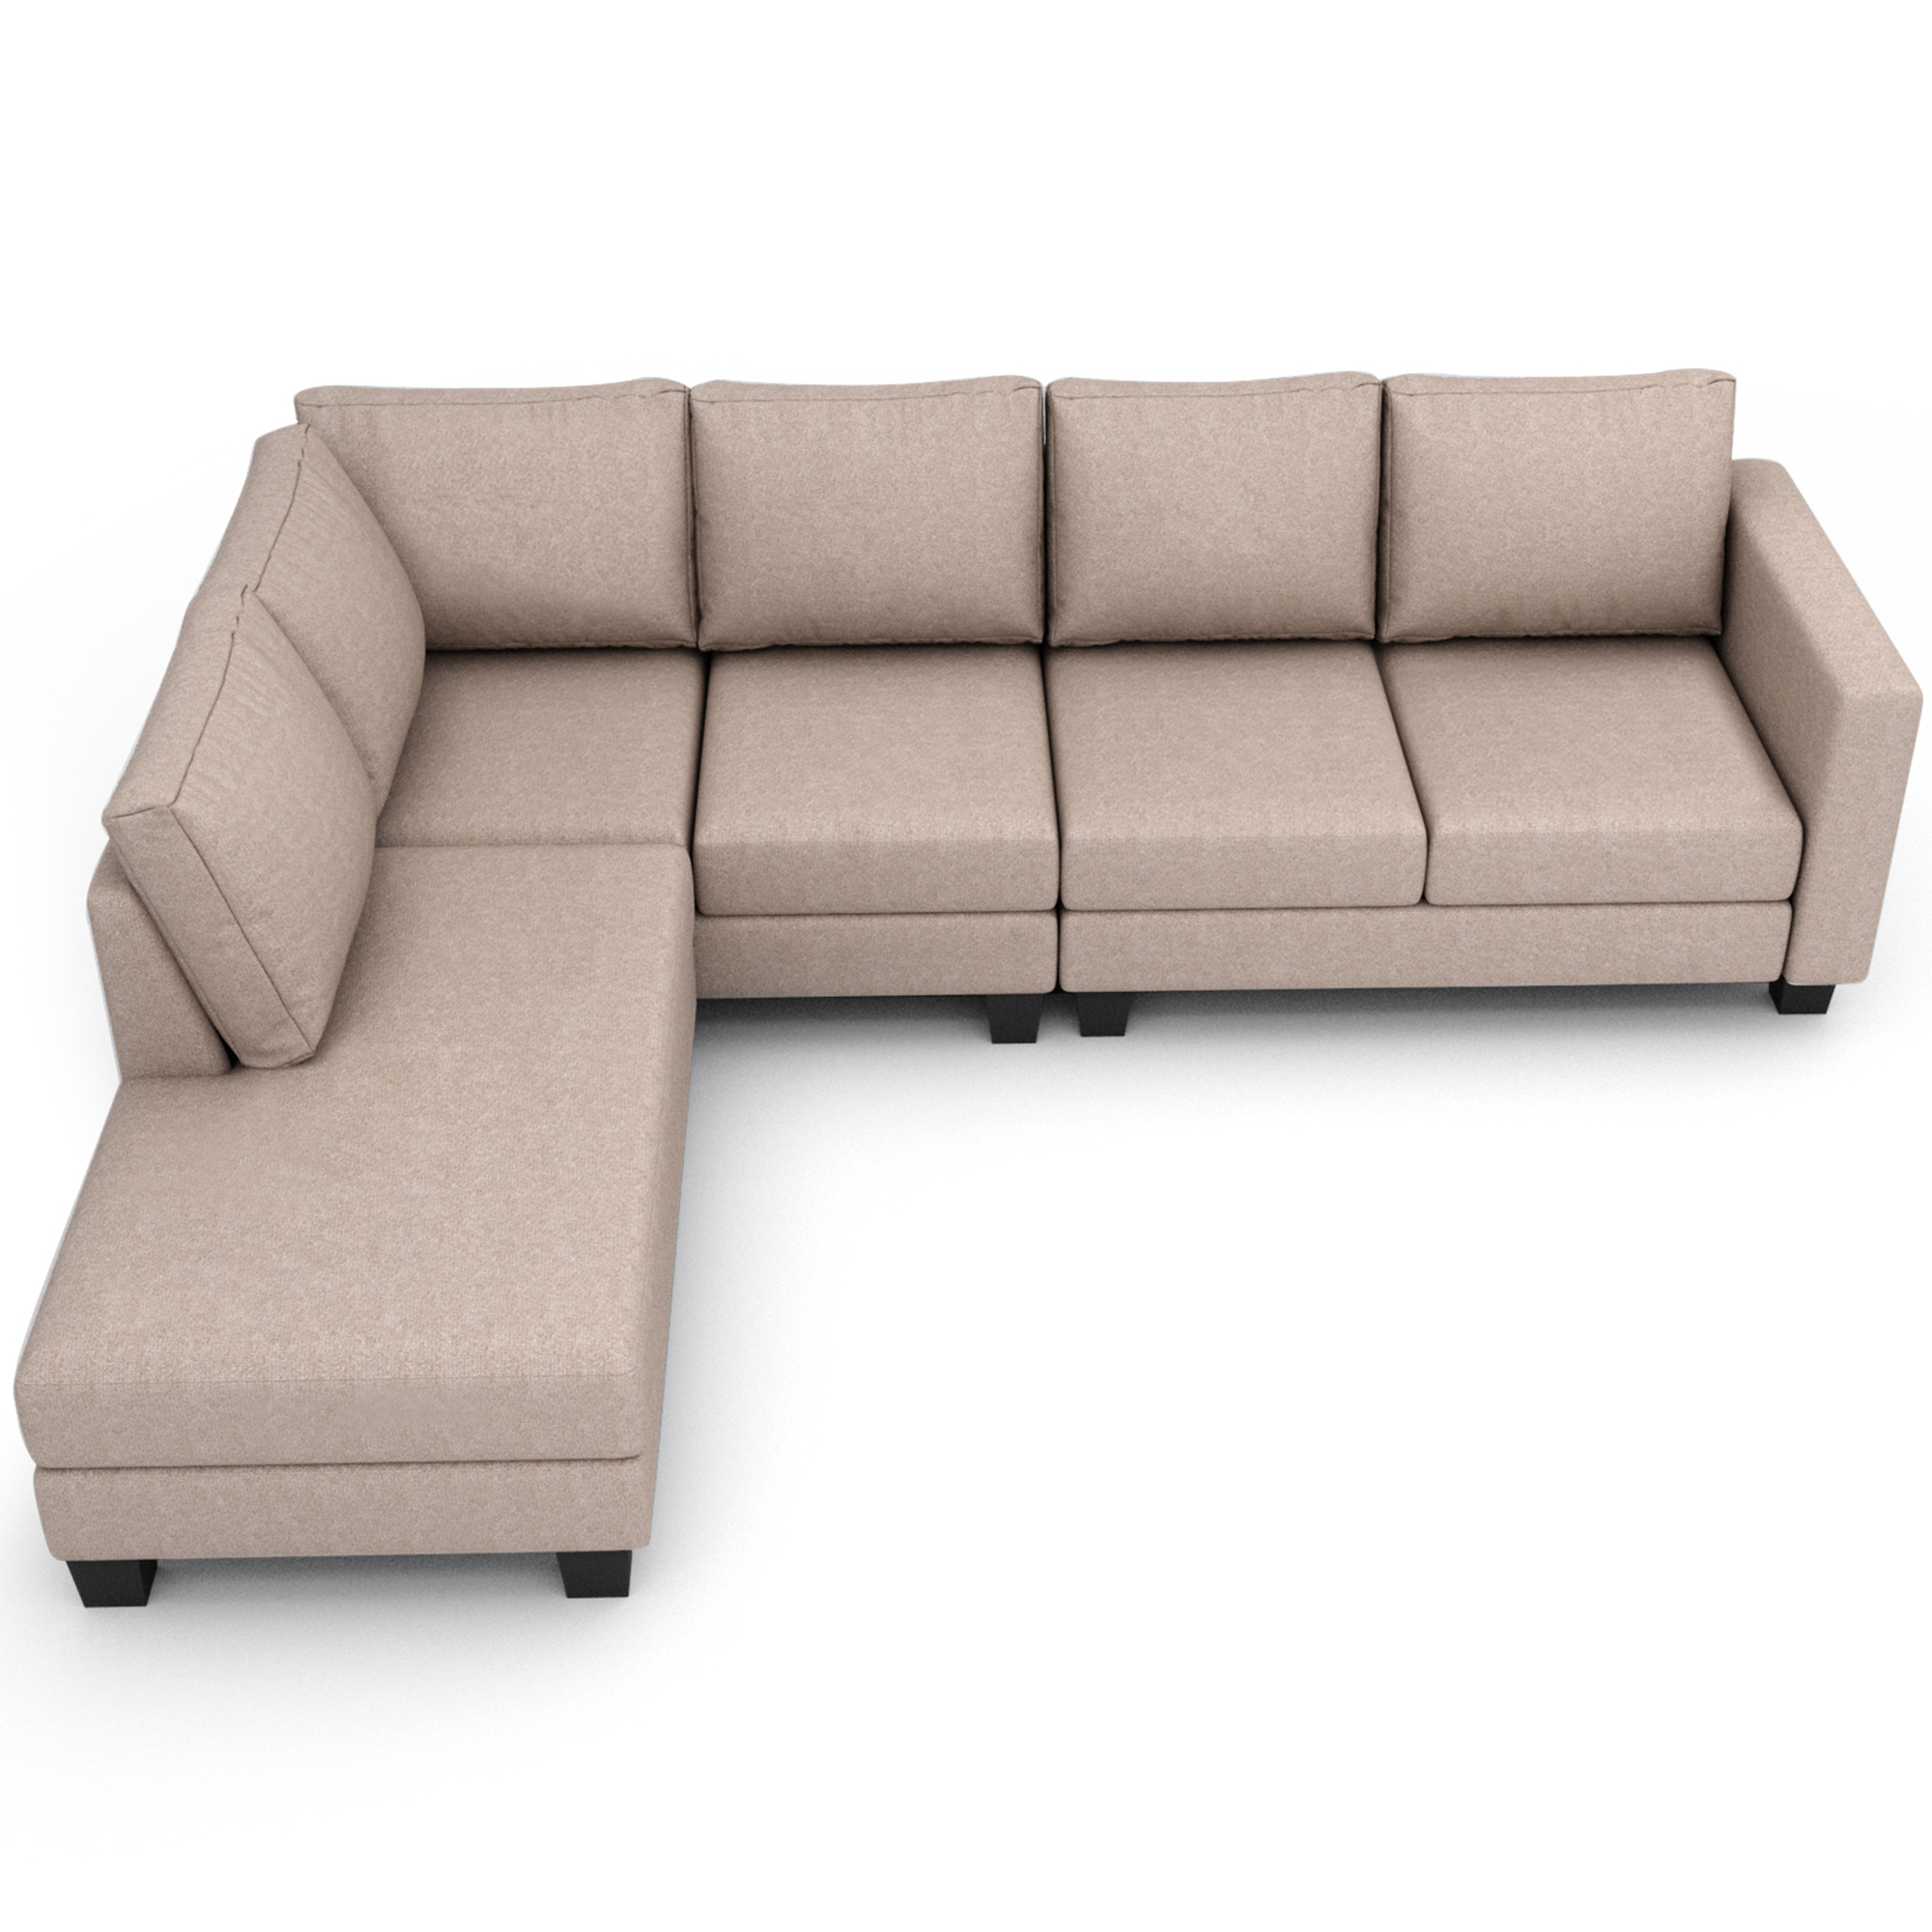 Textured Fabric Sectional Sofa Set, L-shaped Sofa With 5 Seaters for Home Use, Left-arm Facing Chaise